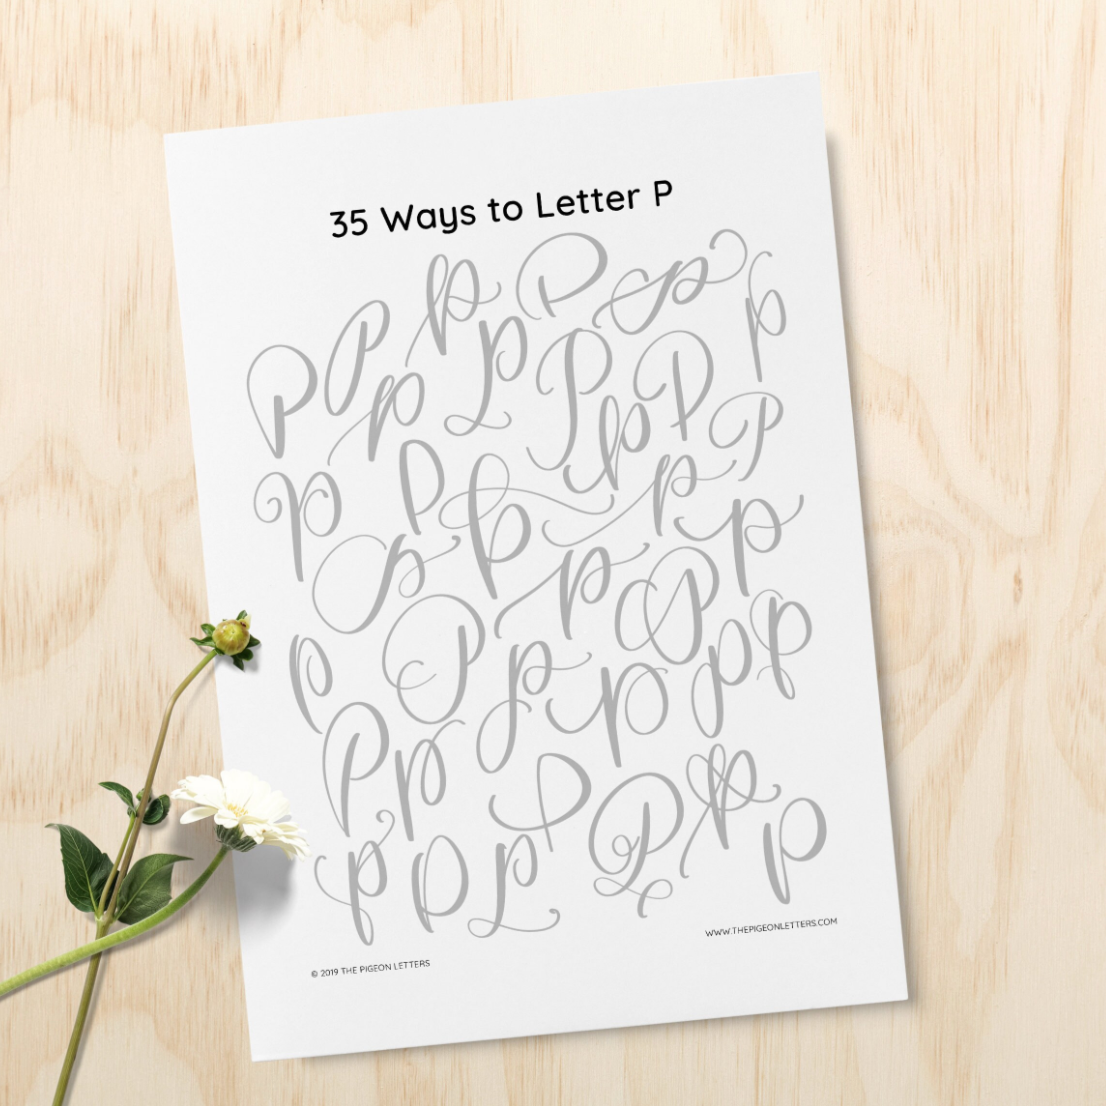 practice sheets for lettering